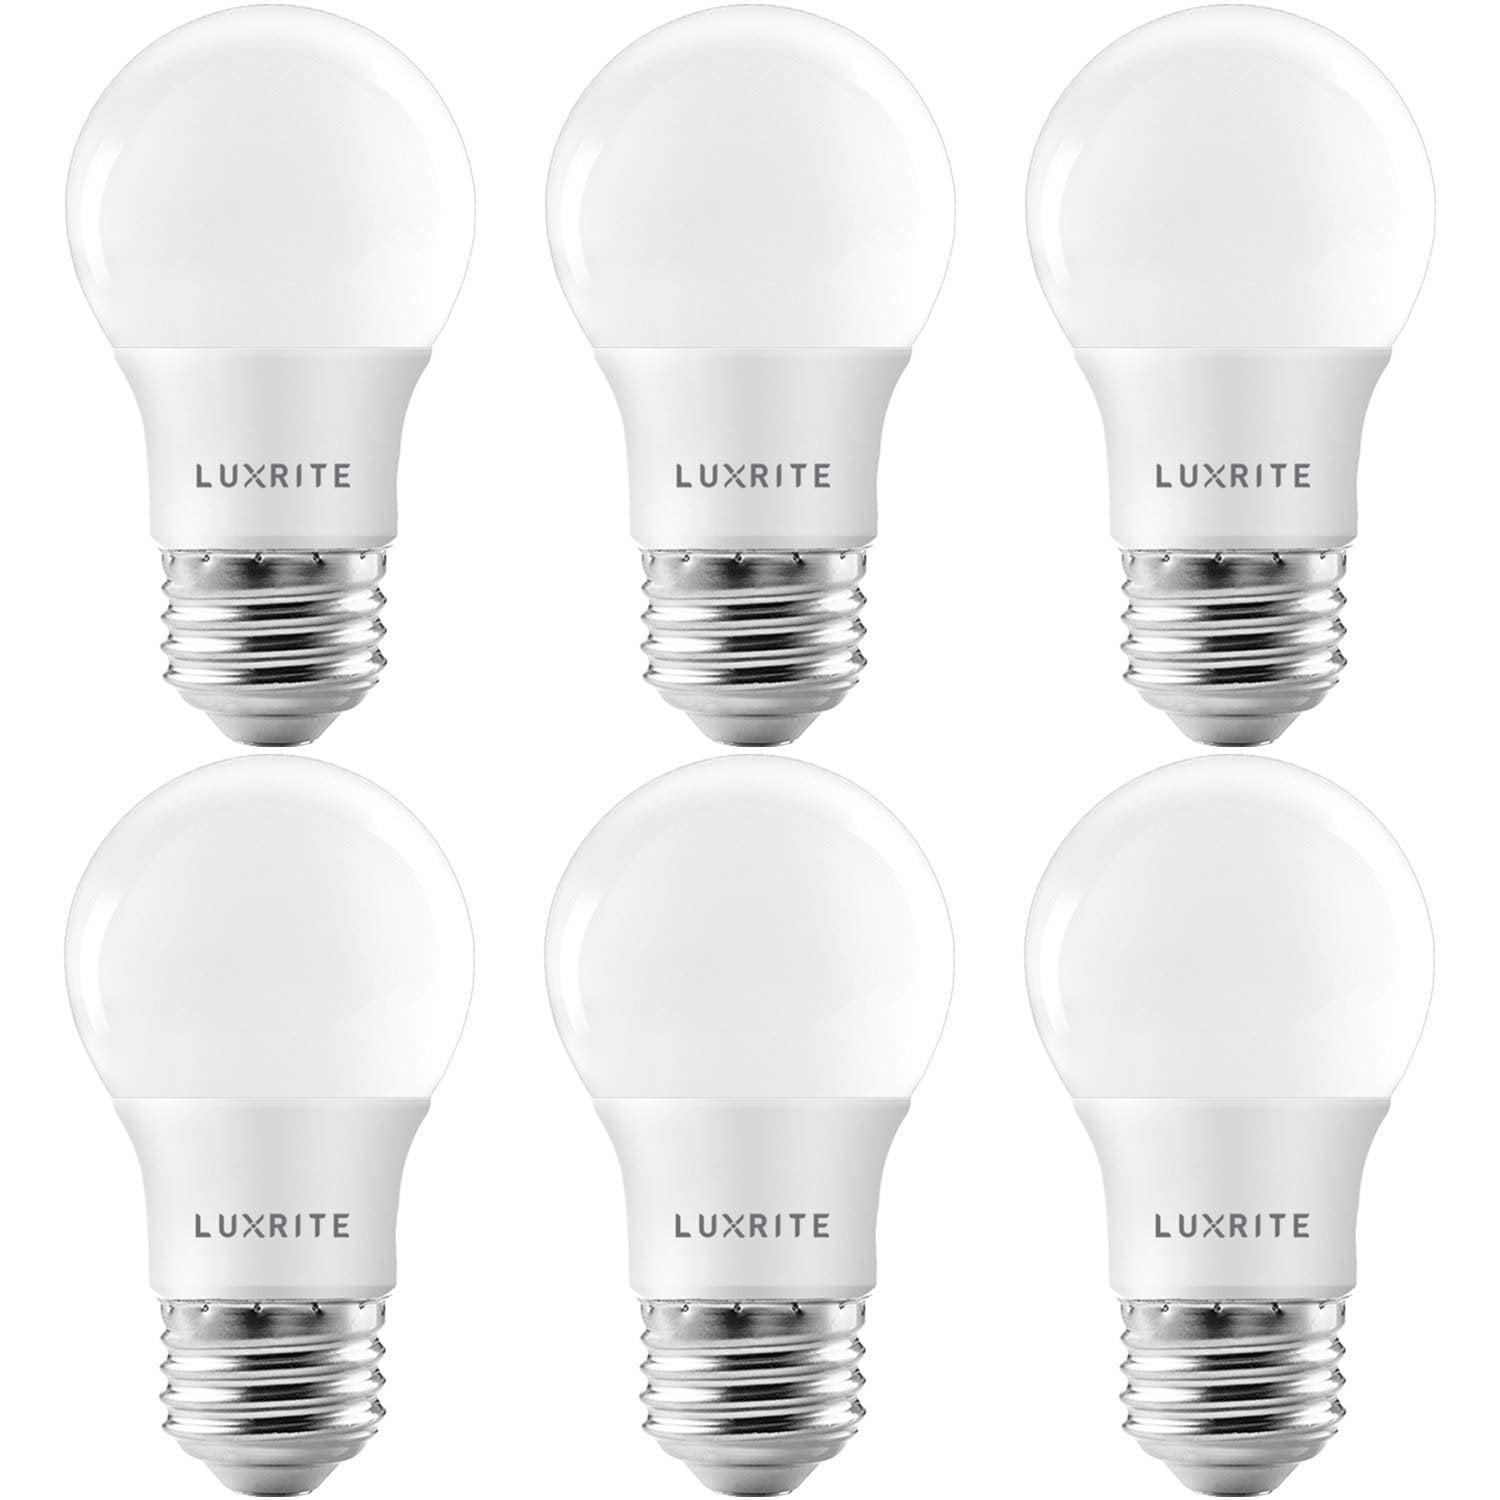 800 Lumens UL Listed E26 LED Bulb Dimmable Warm White 2700K 6-Pack Luxrite LED Filament Bulb A19 Great for Any Indoor/Outdoor Use Damp Rated 7W Bulb to Replace 60W Incandesent Bulb 